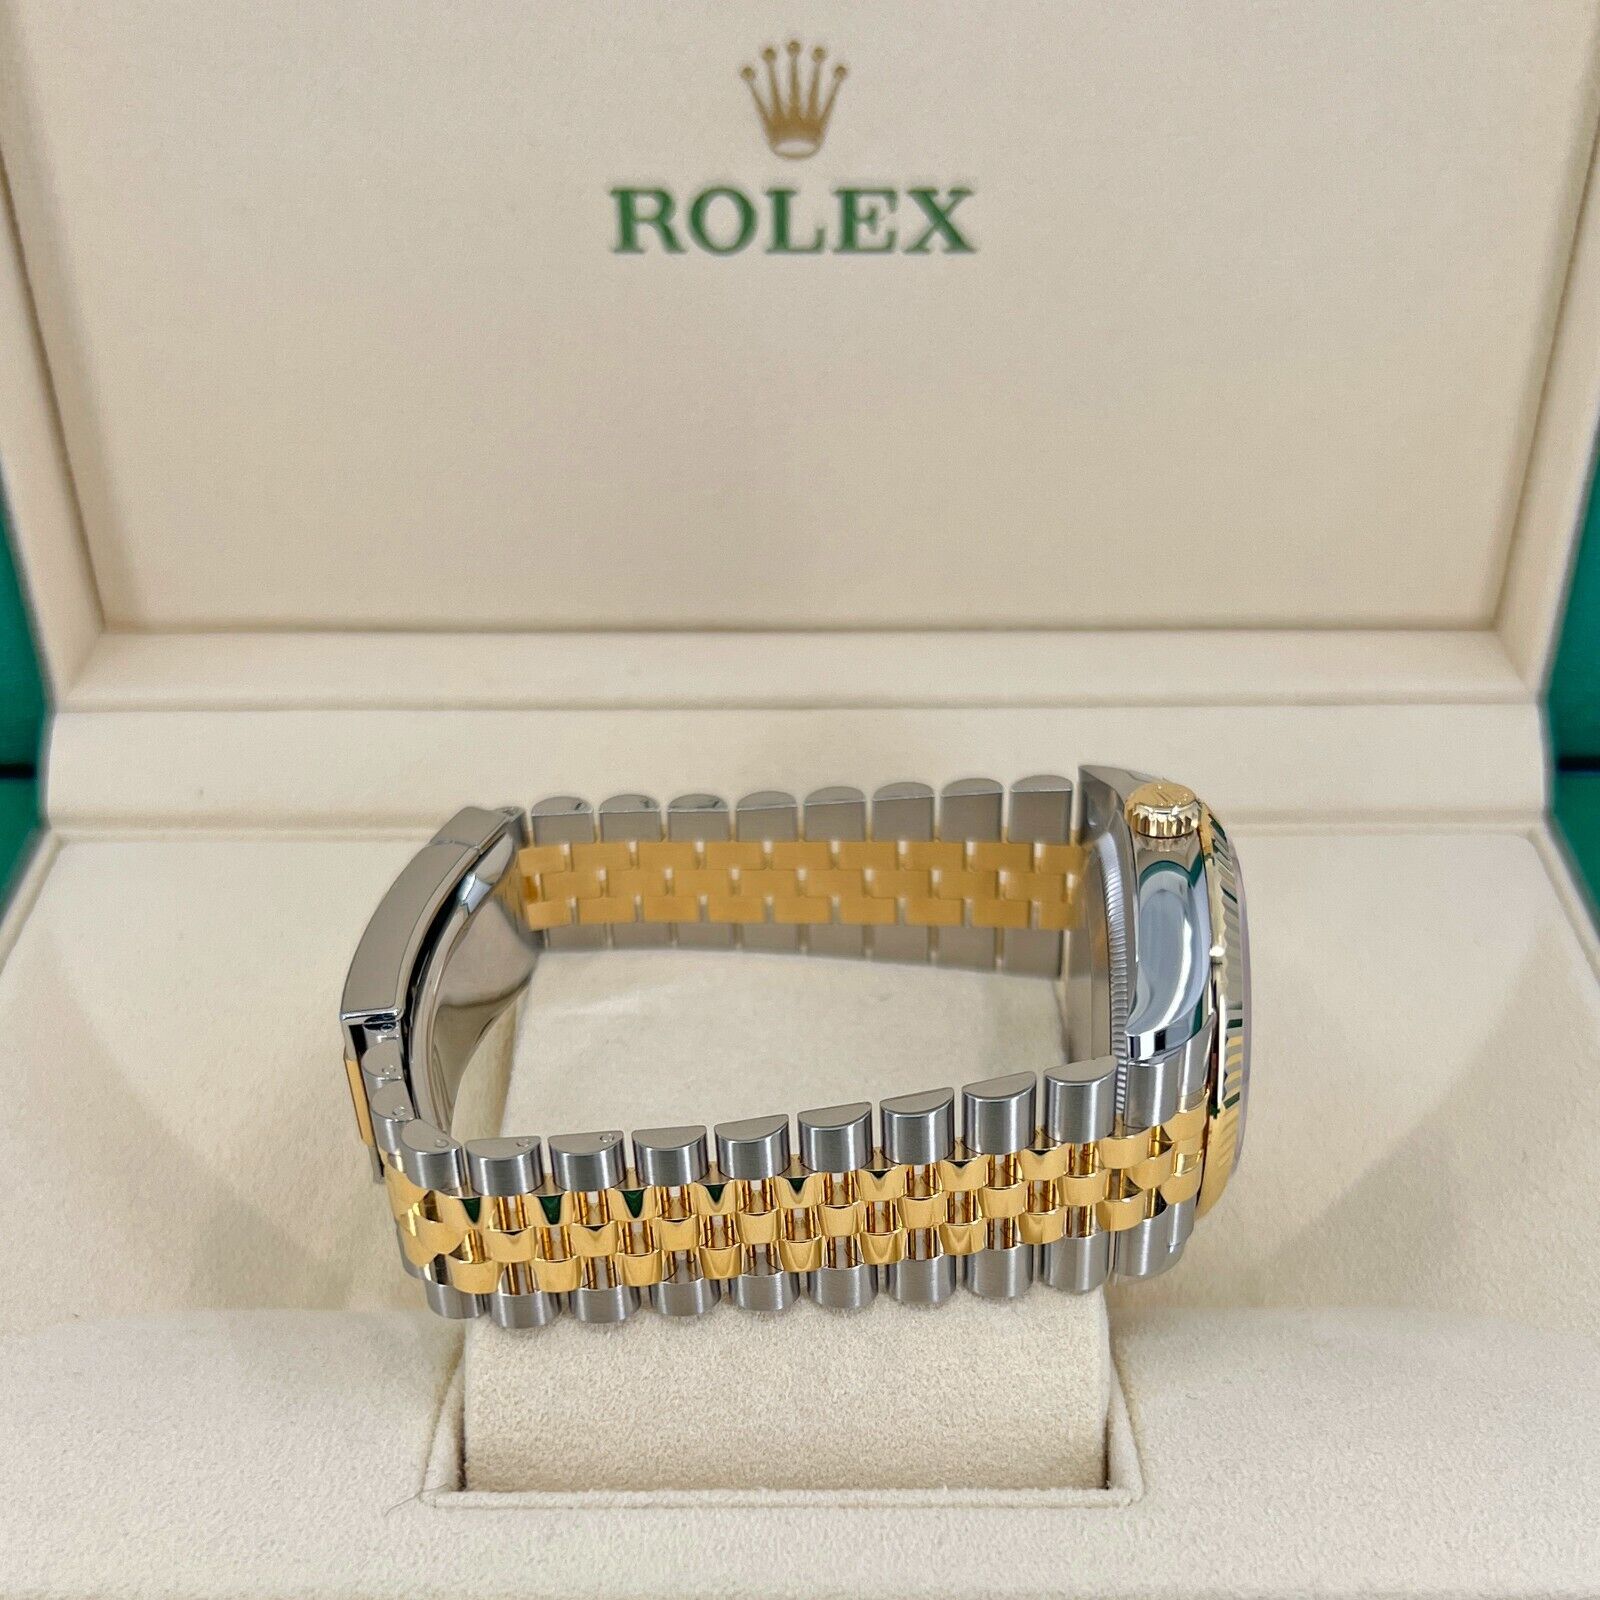 Rolex Datejust 36, 18K Yellow Gold and Stainless Steel, 36mm, Golden, Palm Motif Dial, Ref#126233-0037